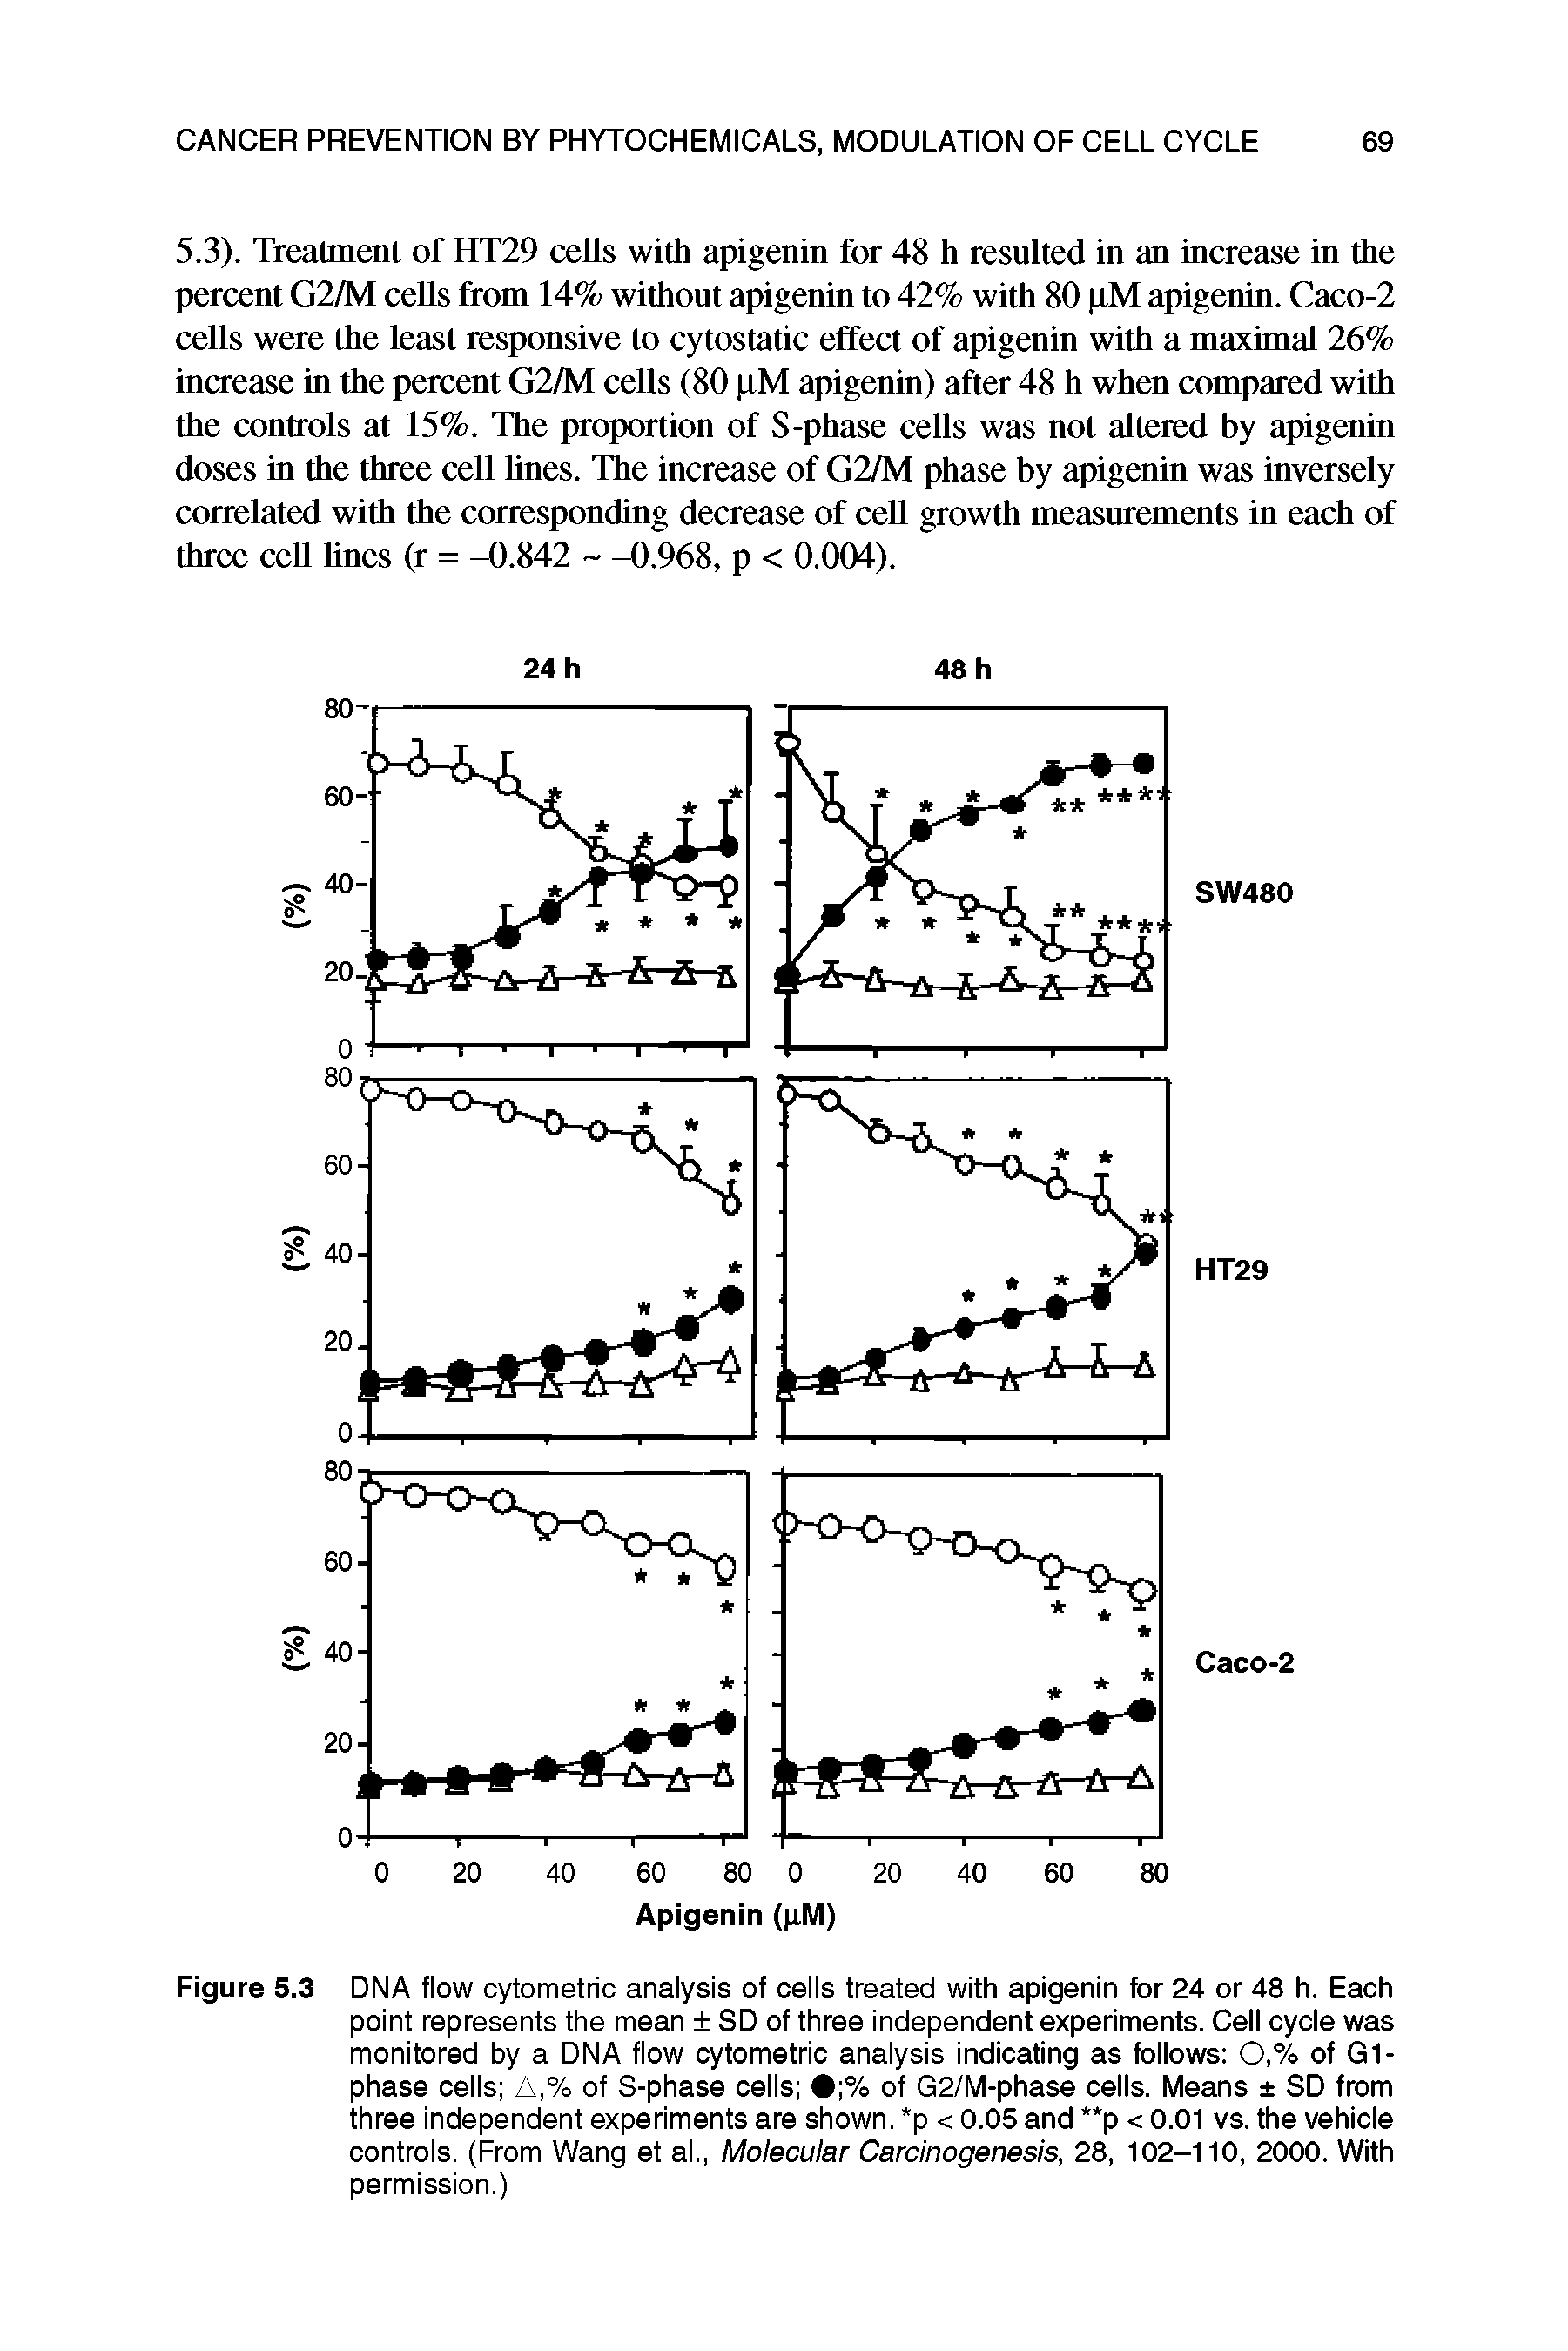 Figure 5.3 DNA flow cytometric analysis of cells treated with apigenin for 24 or 48 h. Each point represents the mean SD of three independent experiments. Cell cycle was monitored by a DNA flow cytometric analysis indicating as follows 0,% of G1-phase cells A,% of S-phase cells % of G2/M-phase cells. Means SD from three independent experiments are shown. p < 0.05 and p < 0.01 vs. the vehicle controls. (From Wang et at, Molecular Carcinogenesis, 28, 102-110, 2000. With permission.)...